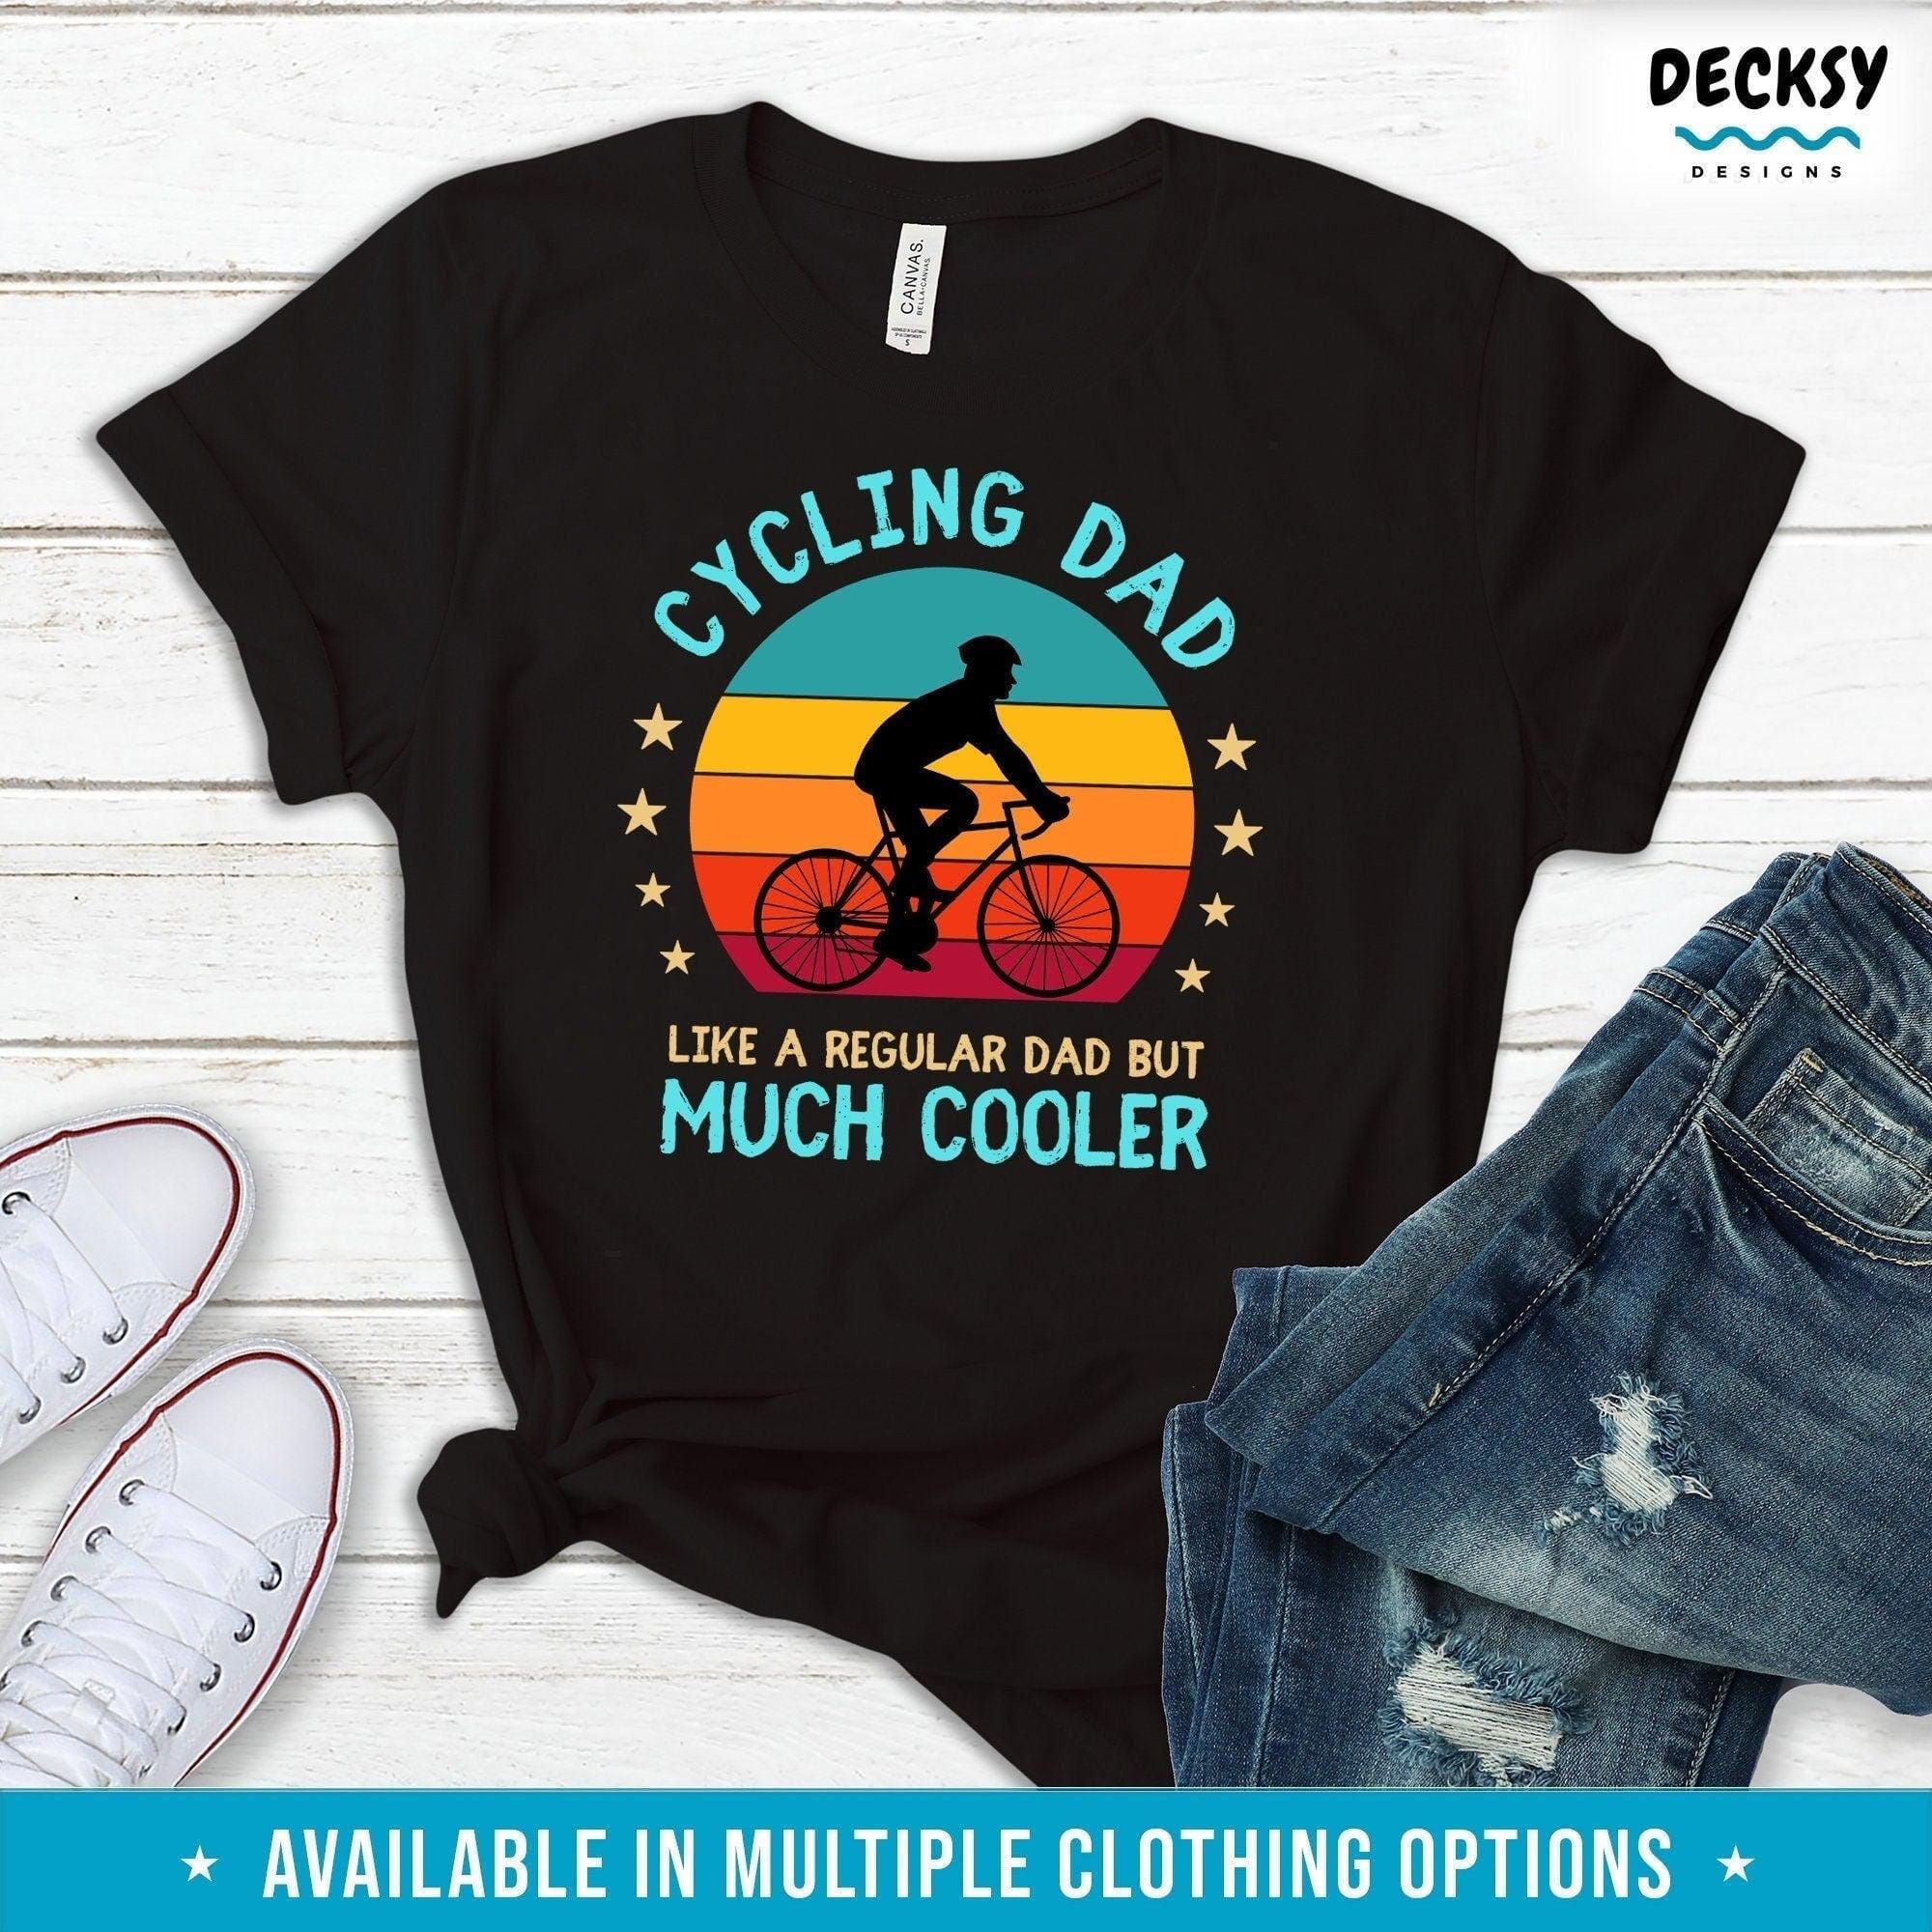 Cycling Dad Shirt, Bicycling Gifts Men-Clothing:Gender-Neutral Adult Clothing:Tops & Tees:T-shirts:Graphic Tees-DecksyDesigns